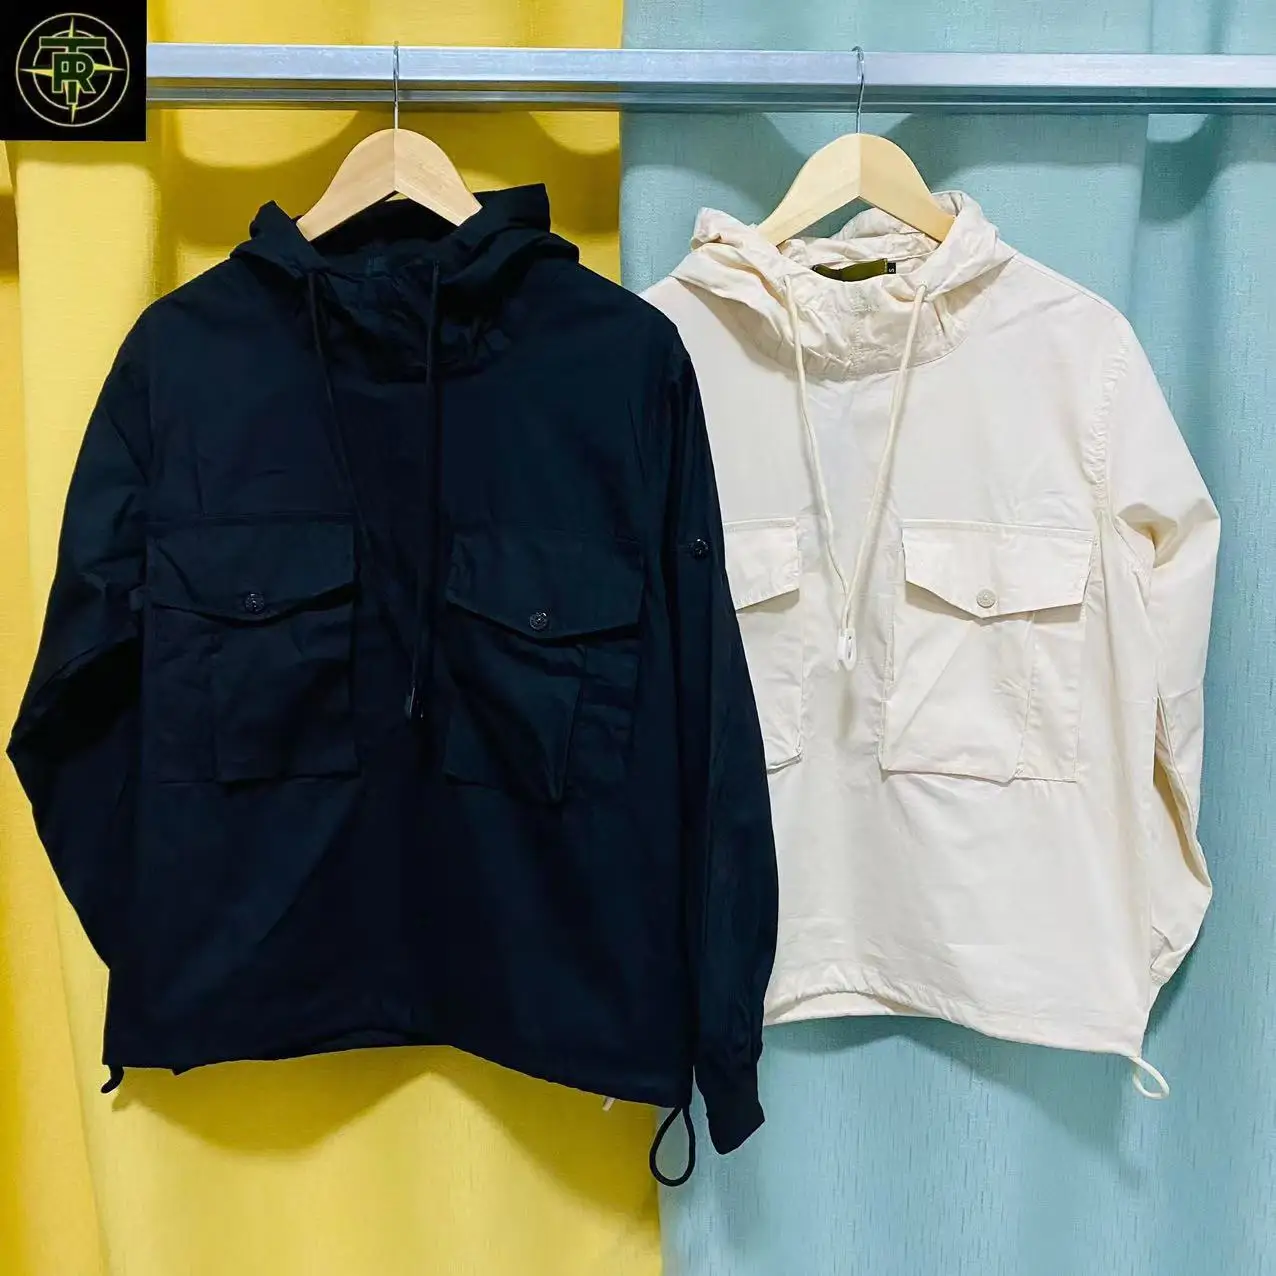 

This Is A Trendy Brand Store Latest Classic Compass Badge Ghost Collection Workwear Bi-directional Pocket Hooded Sweater Jacket